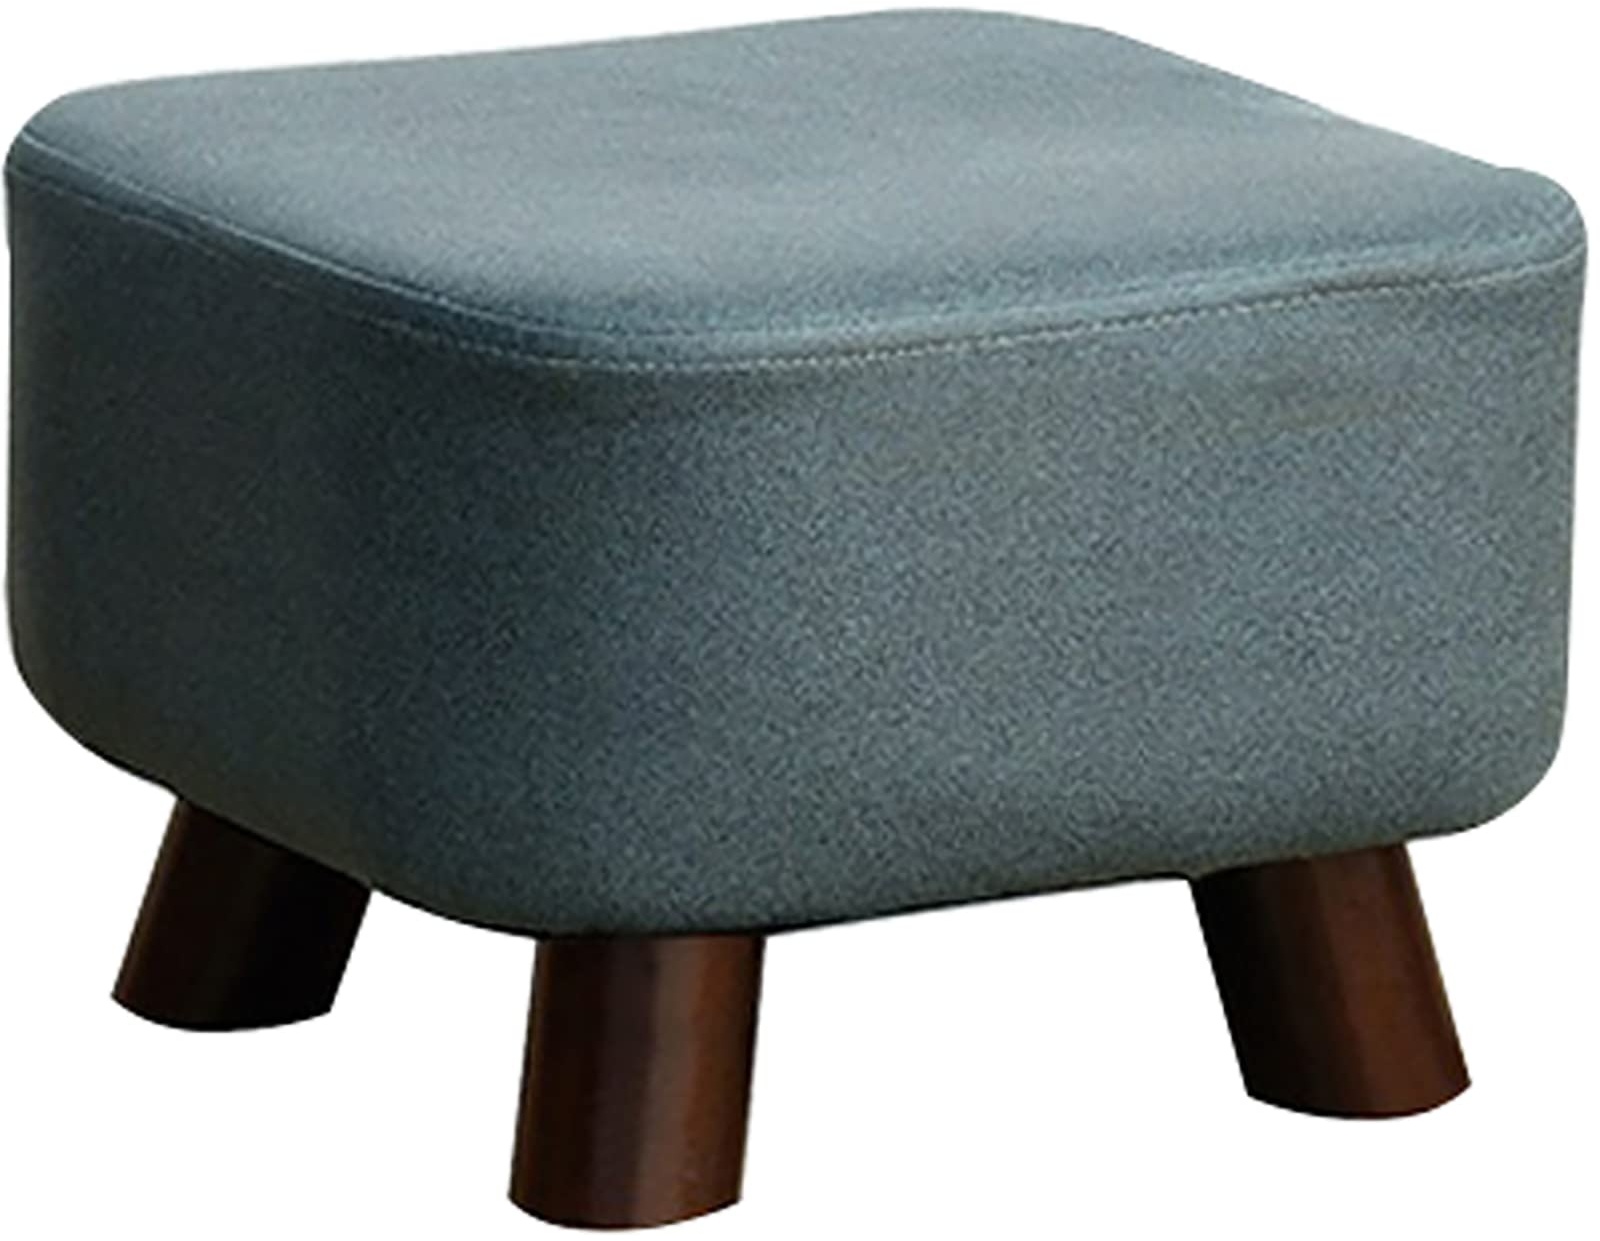 Bleyoum Fabric Square Footstool with Wood Legs Footrest Small Ottoman Stool with Non-Skid Wood Legs Modern Small Step Stool for Outdoor Couch Office Living Room(Size:28cm*28cm*19cm,Color:Dark Green)